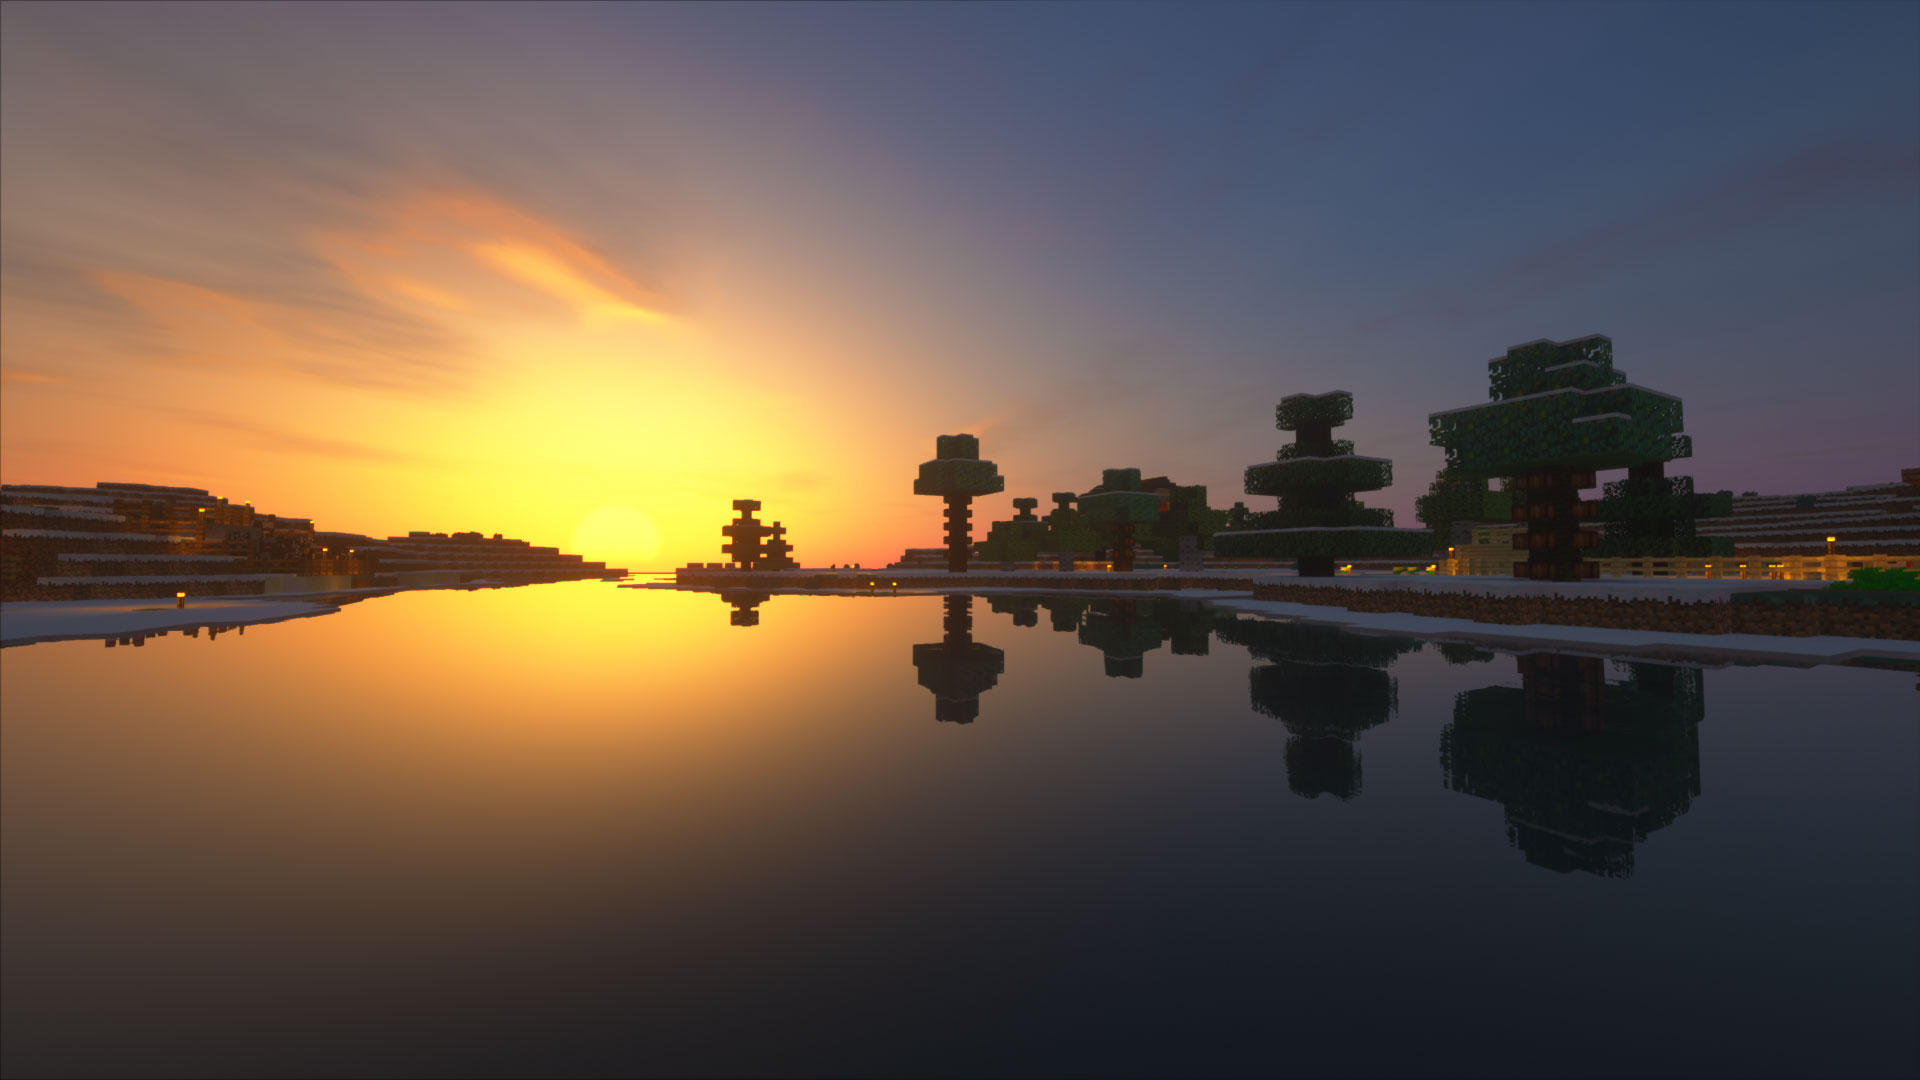 General 1920x1080 Minecraft Shader shaders sunset reflection snow video game landscape PC gaming video games screen shot